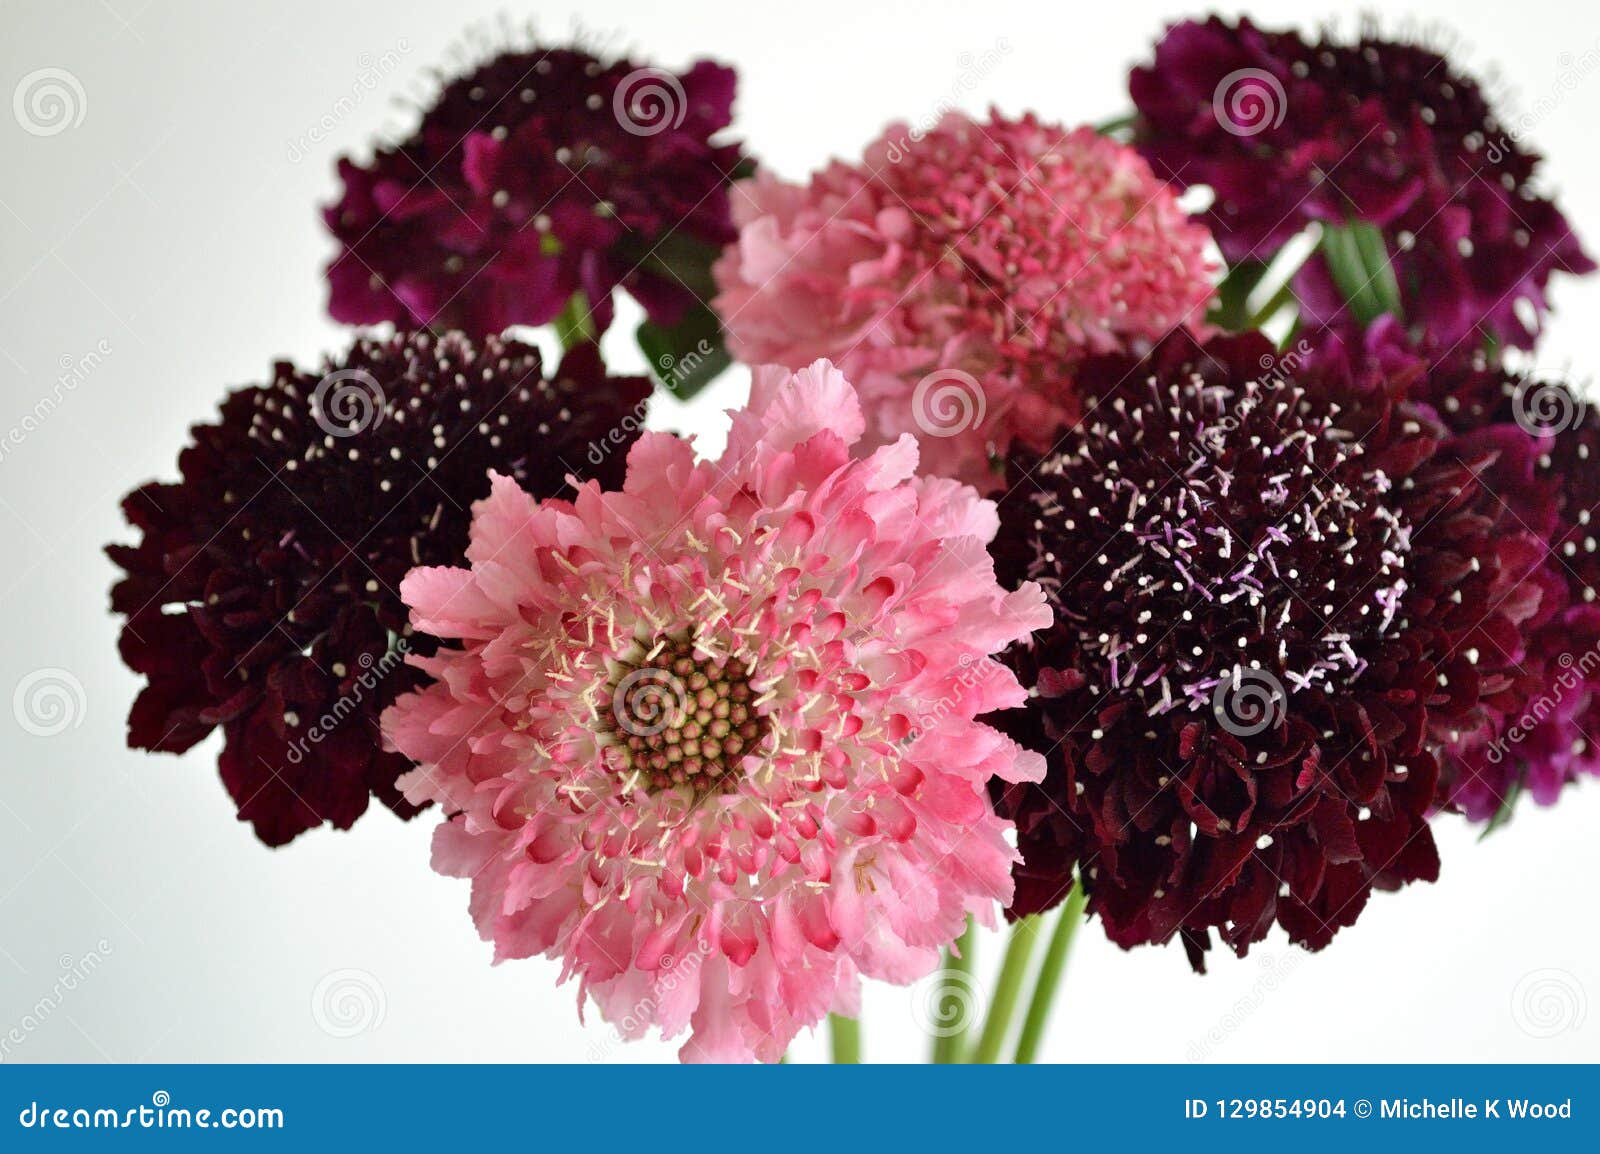 Salmon Queen Black Pompom Black Knight Pincushion Flower Bouquet White Background Stock Photo Image Of Black Knight 129854904